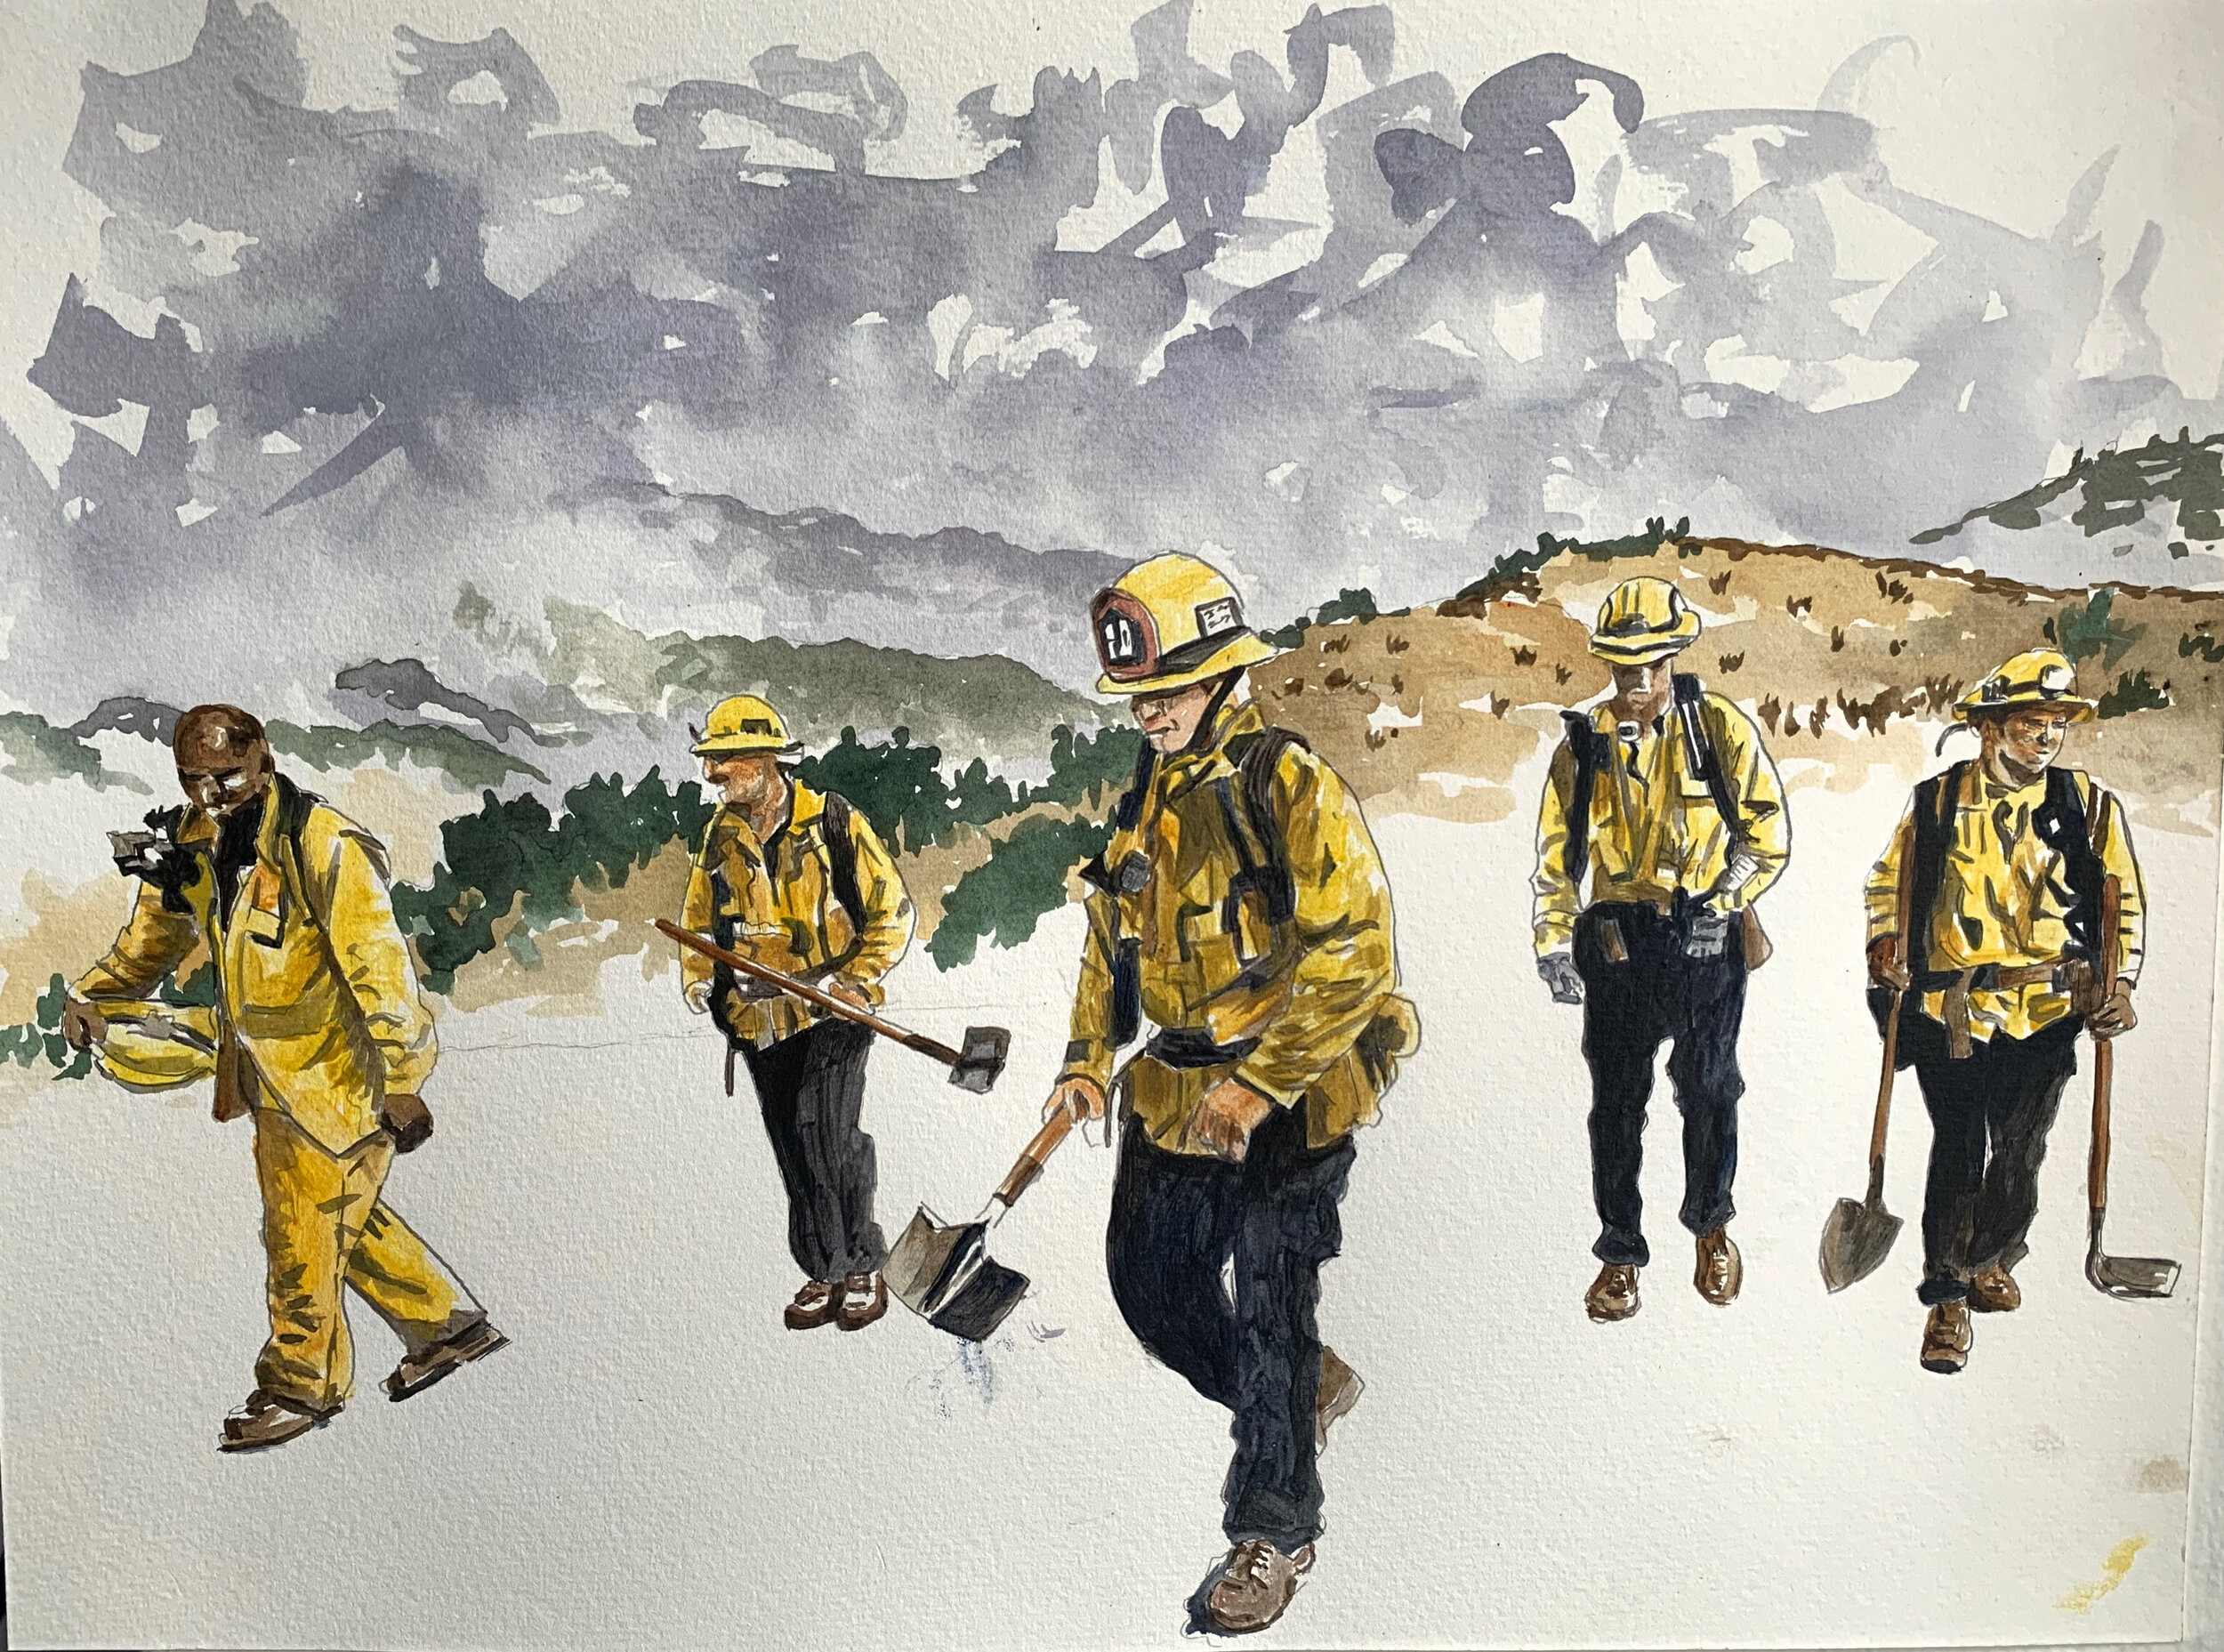 Untitled Firefighters, 2020, acrylic on paper, 12 x 16 inches